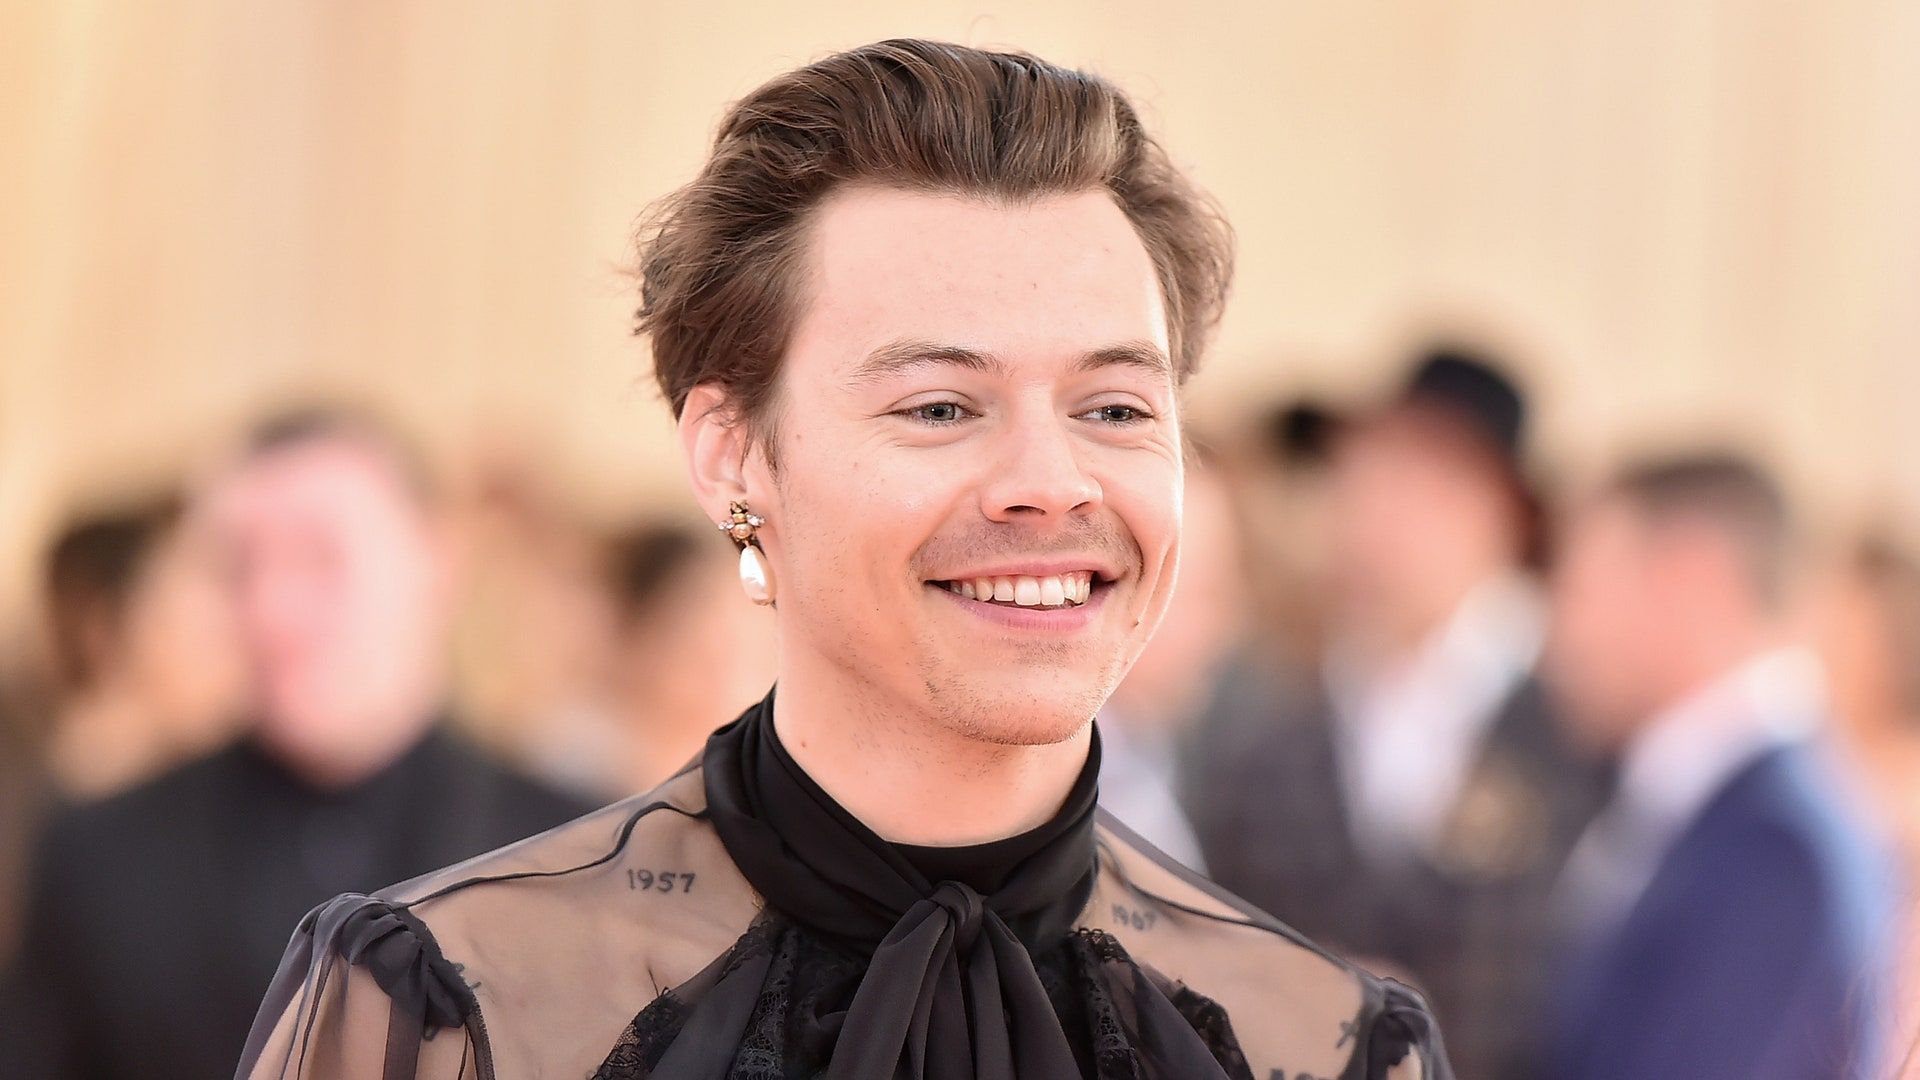 The Harry Styles hair guide